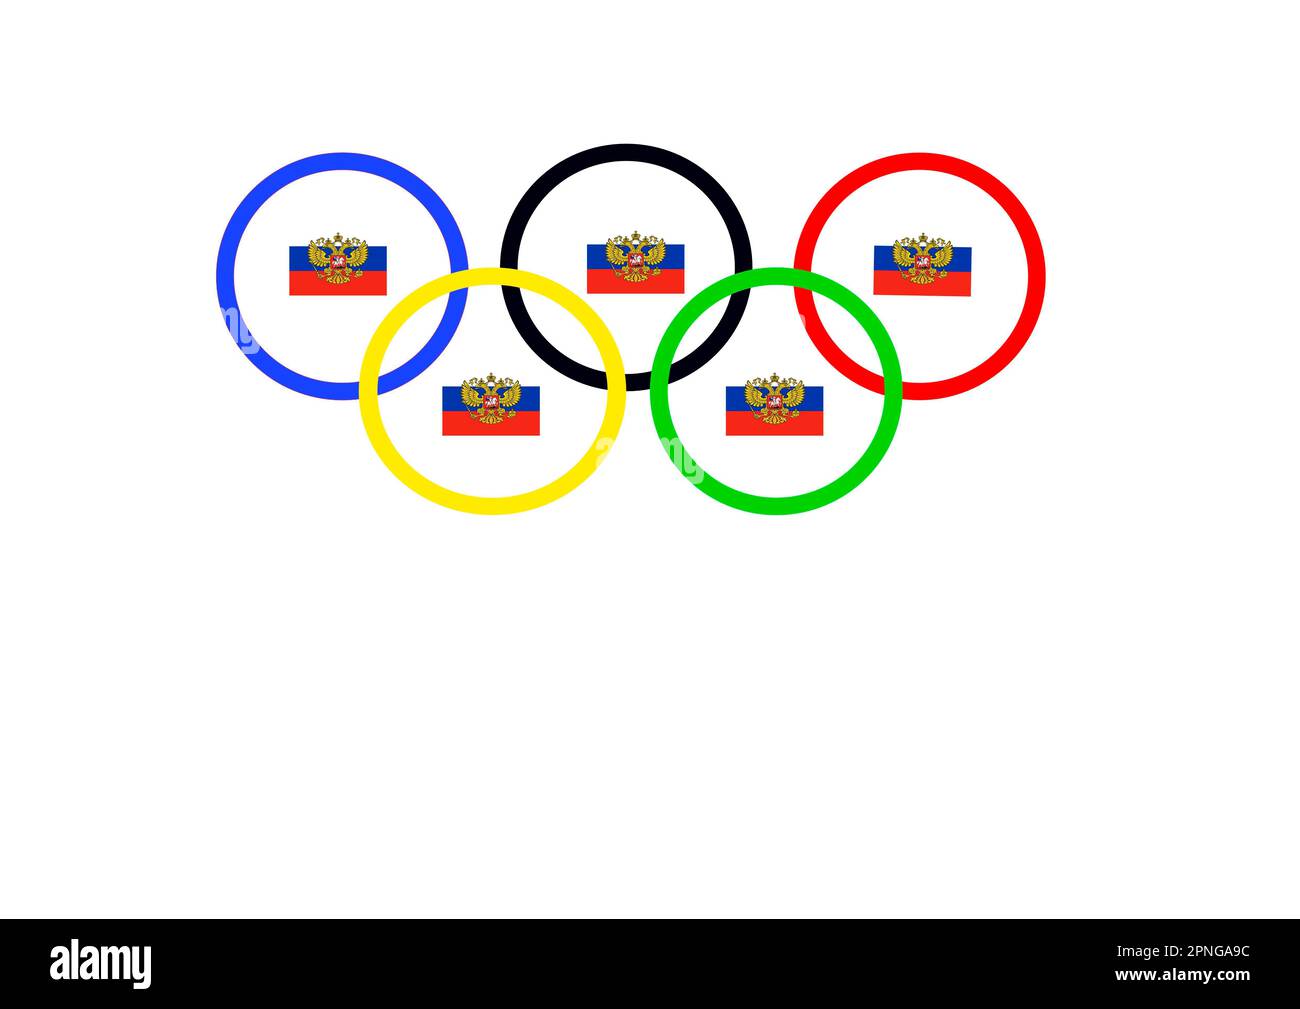 Interesting Facts About the Olympics